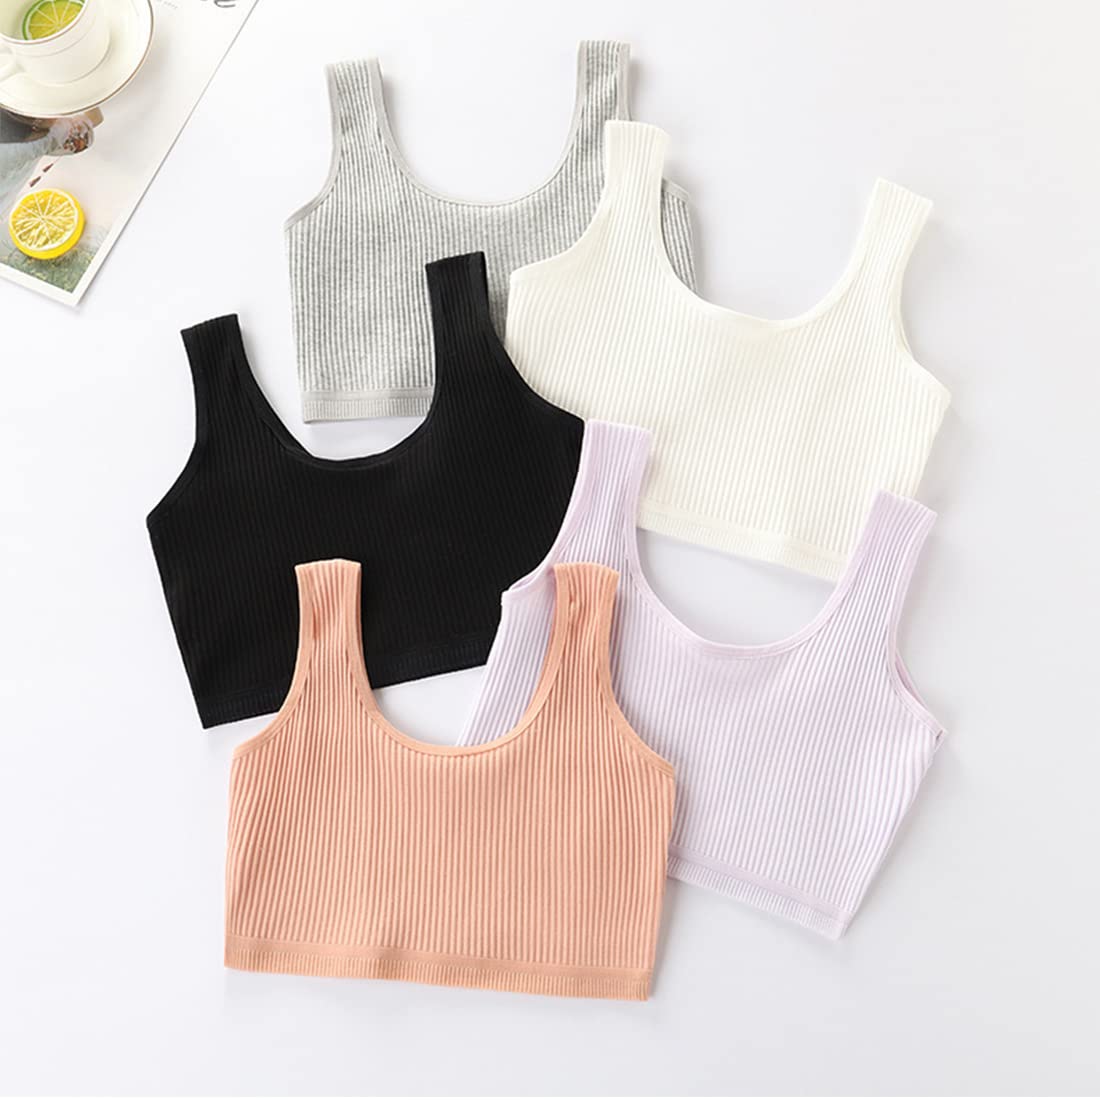 Training Bras for Girls, Seamless Bralette, Kids Underwear, Elastic Sports Striped Vest, Developing Children's Bra Breathable Cotton Cropped Double-Deck Bra for Students Suitable Weight 25-35kg 6PCS Size (Small)